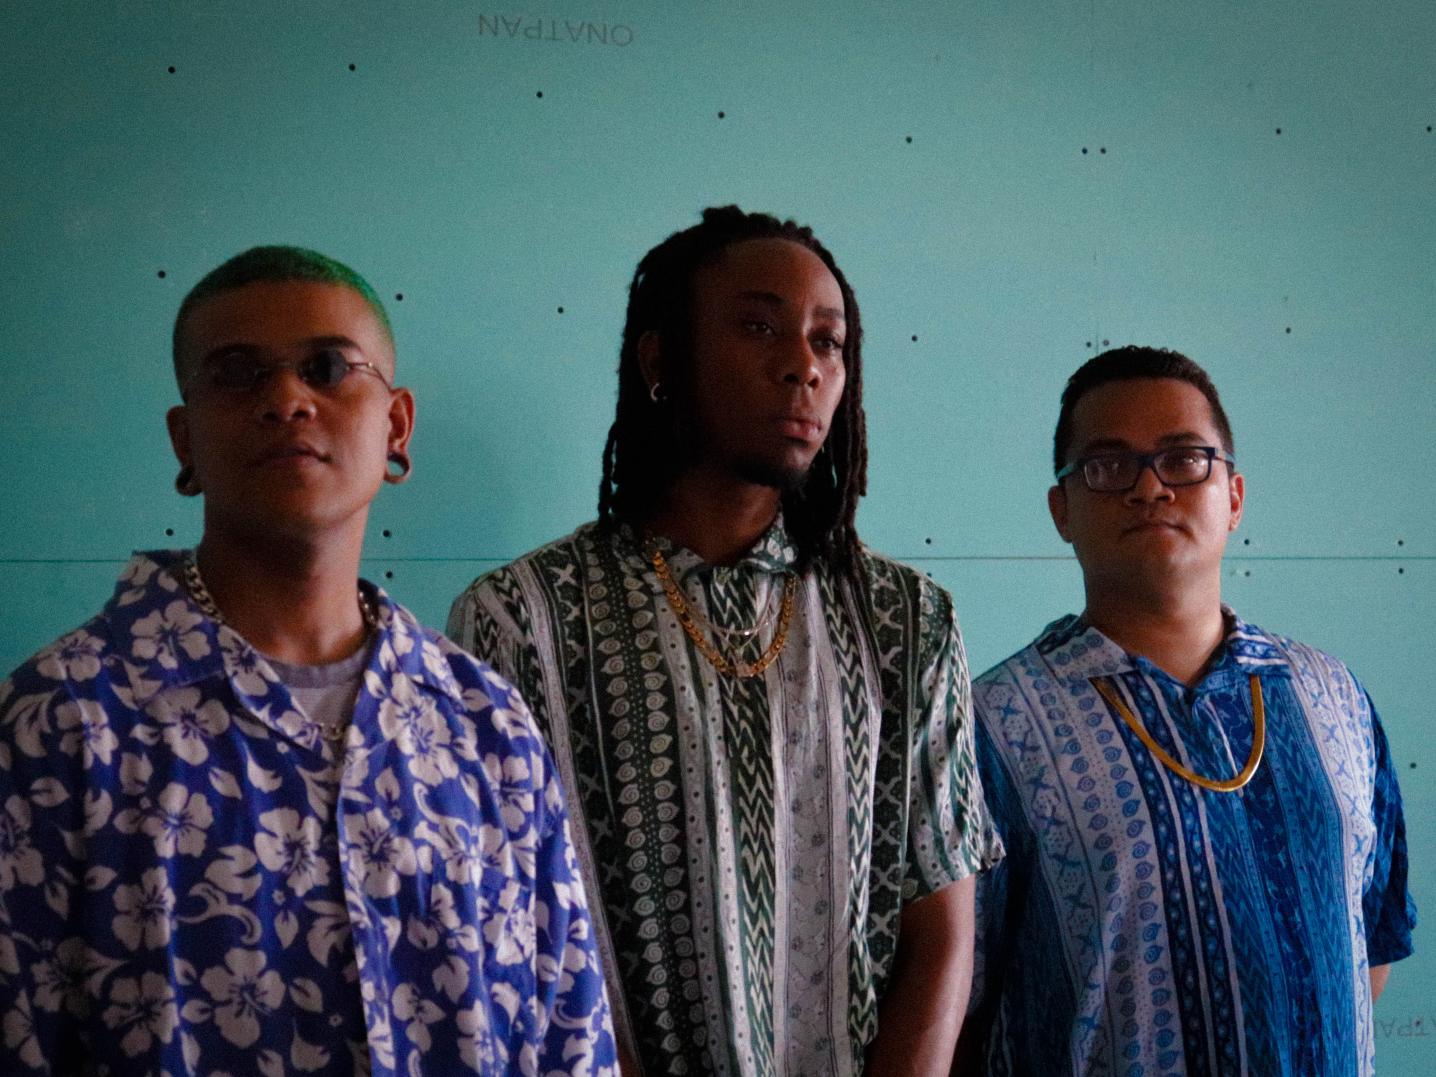 The band members of Luguber, from left to right:  Shavero Ferrier, Akeem Smith en Regillio Padma.